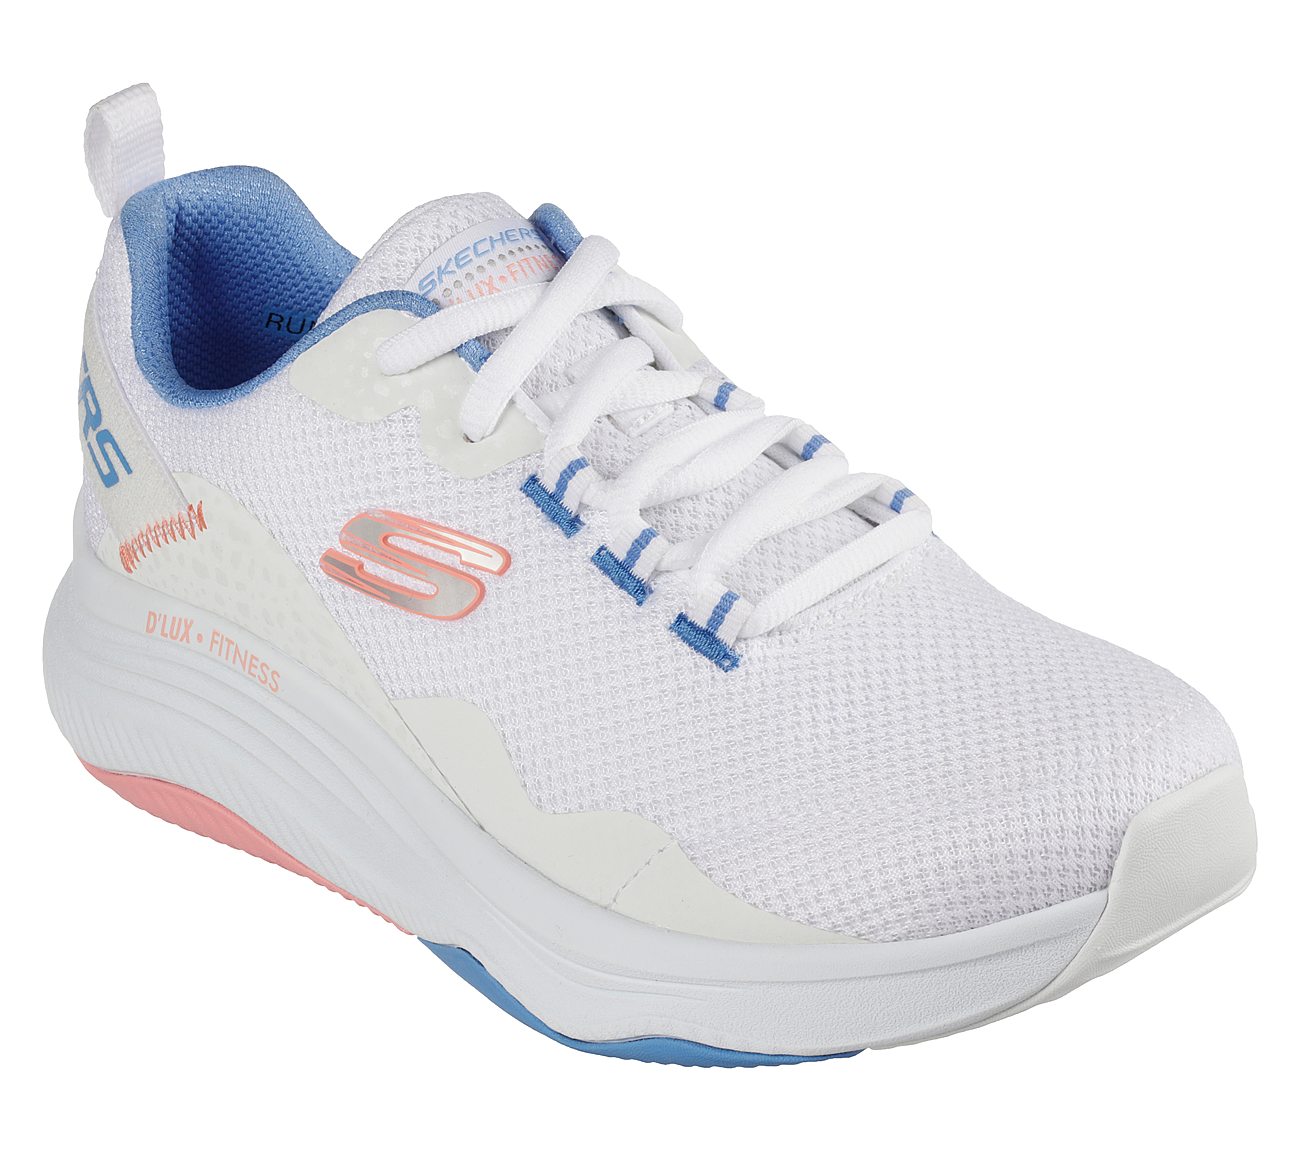 D'LUX FITNESS-ROAM FREE, WHITE Footwear Right View